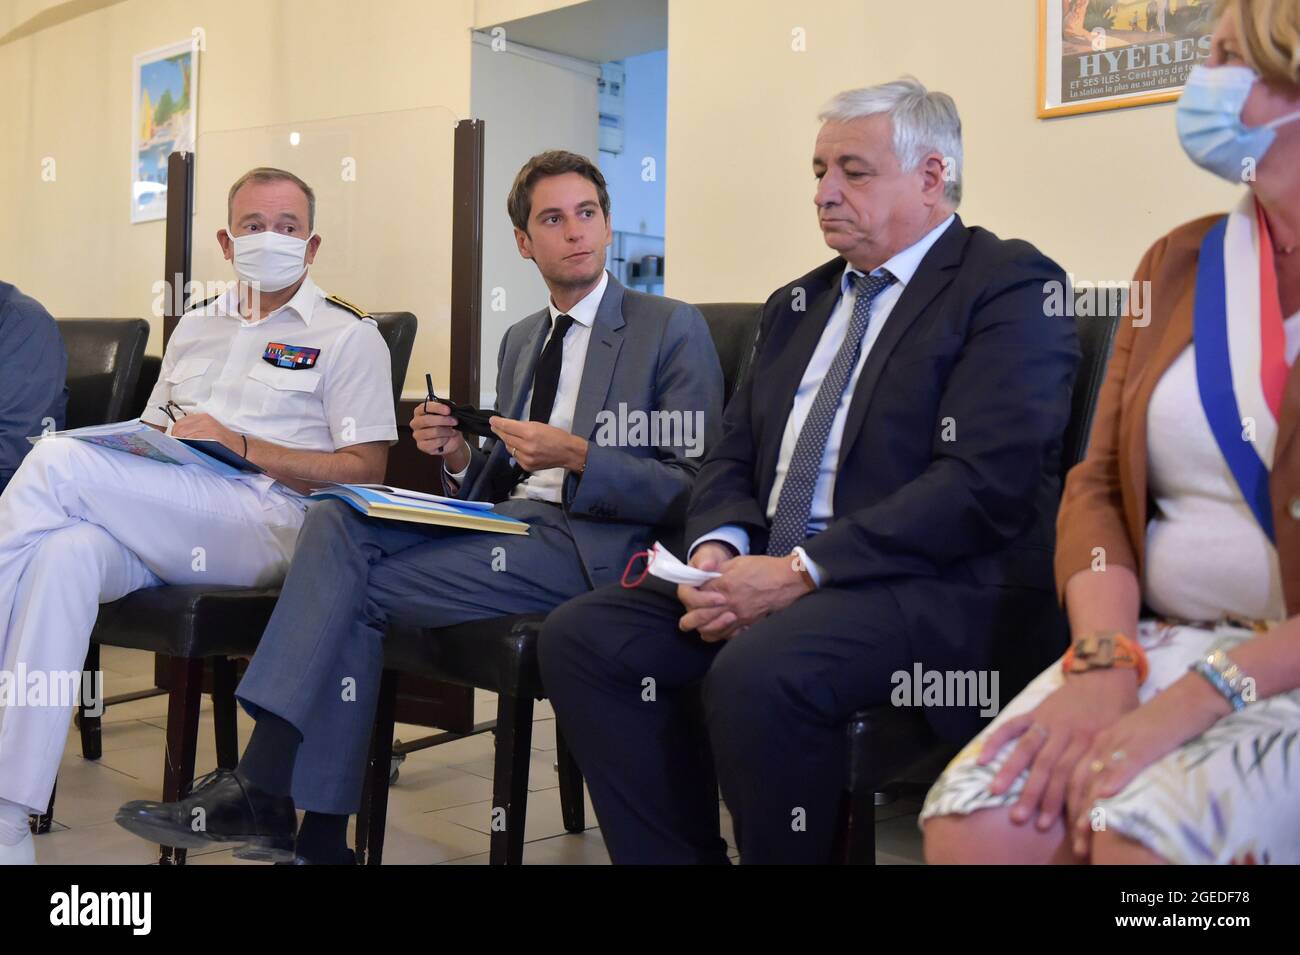 August 18, 2020, Brignoles, Var, France: (L to R) Evence Richard (prefet du var), Gabriel Attal (spokesman for the government), Didier Bremond (Mayor of Brignoles) and ValÃ©rie Gomez-Bassac (deputy LREM du Var) during a meeting with hotel and restaurant owners concerning the sanitary pass implementation..The sanitary pass for shops and restaurants is being implemented gradually since the beginning of August. The government's goal is to have at least 50 million people receive their first covid-19 vaccine injection by the end of August. Government officials are increasing their visits to health Stock Photo